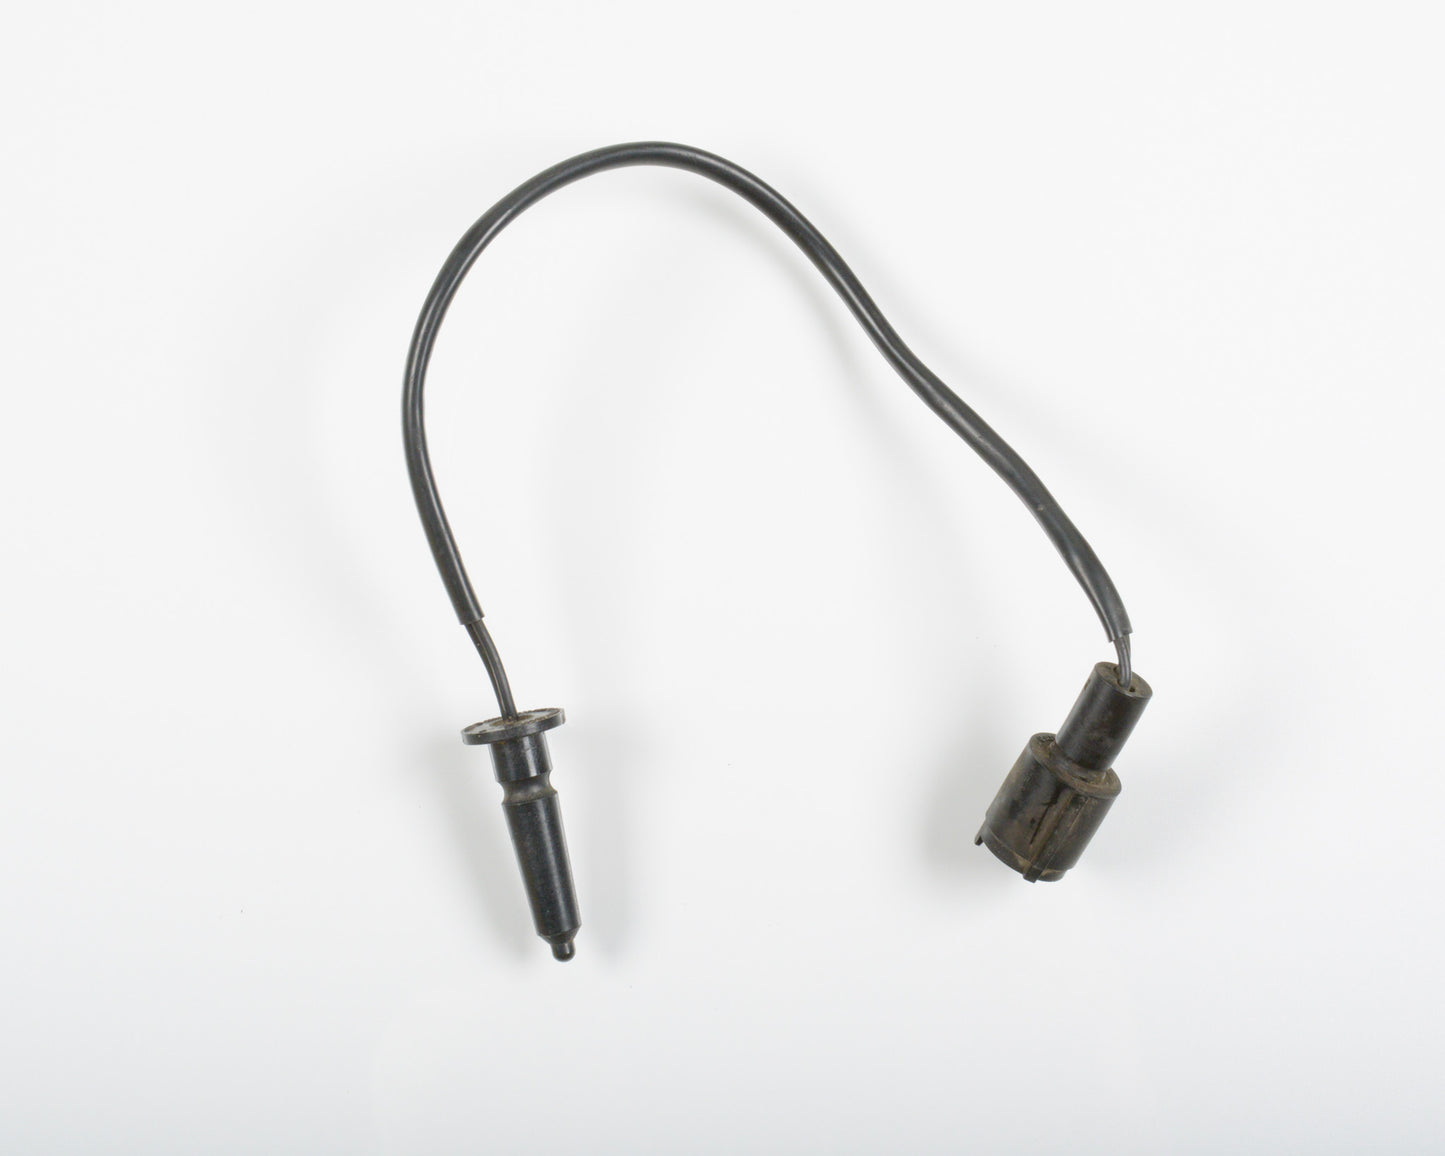 BMW E30 Ambient Outside Temperature Sensor For Onboard Computer  65811385337